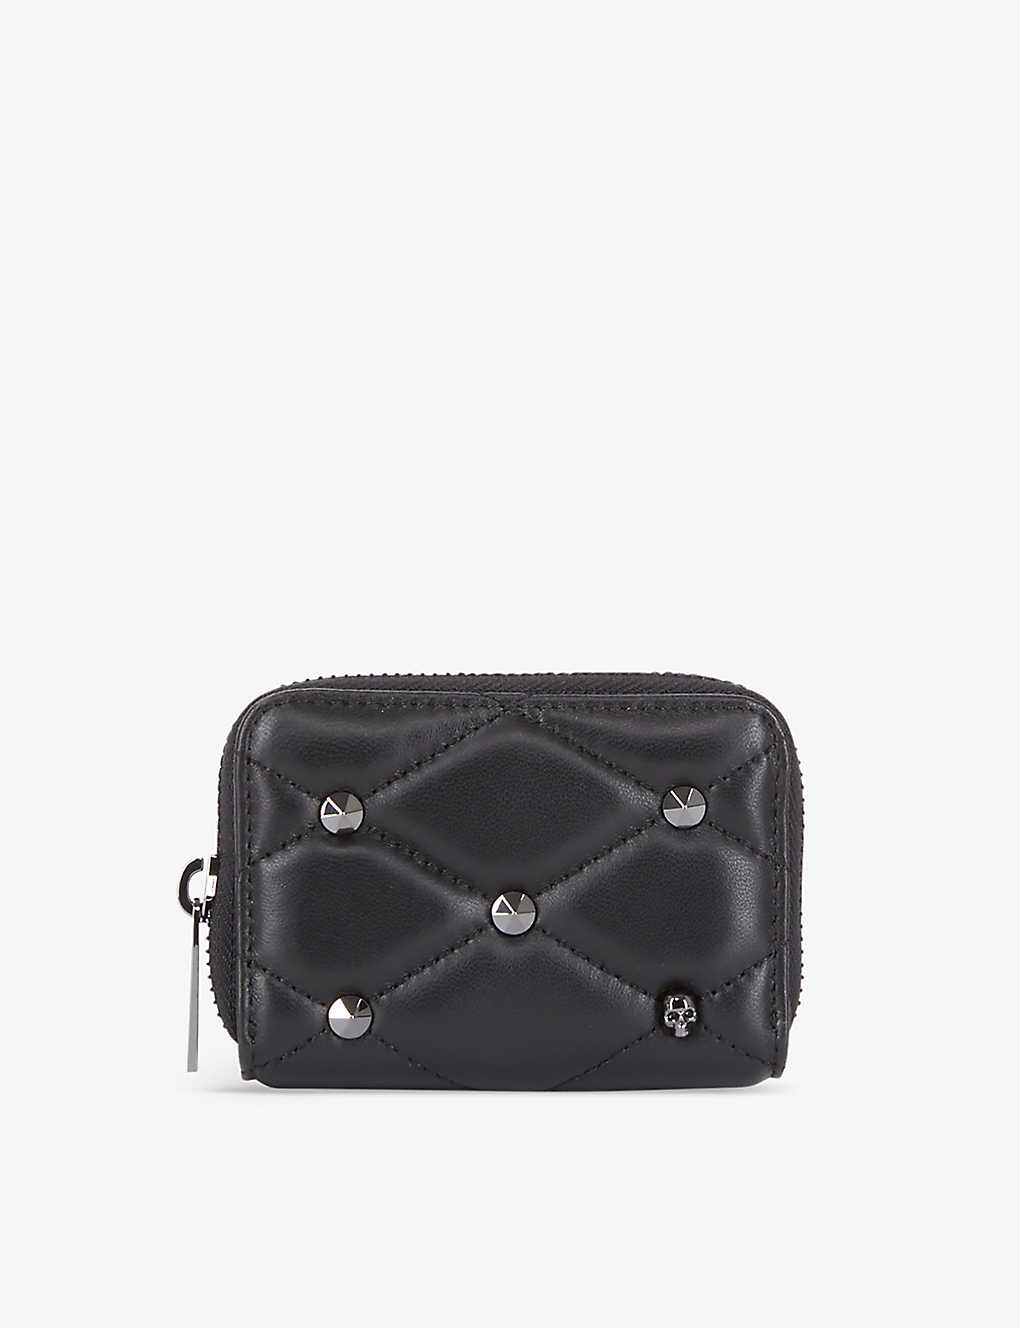 The Kooples Black Quilted Stud-detail Leather Purse